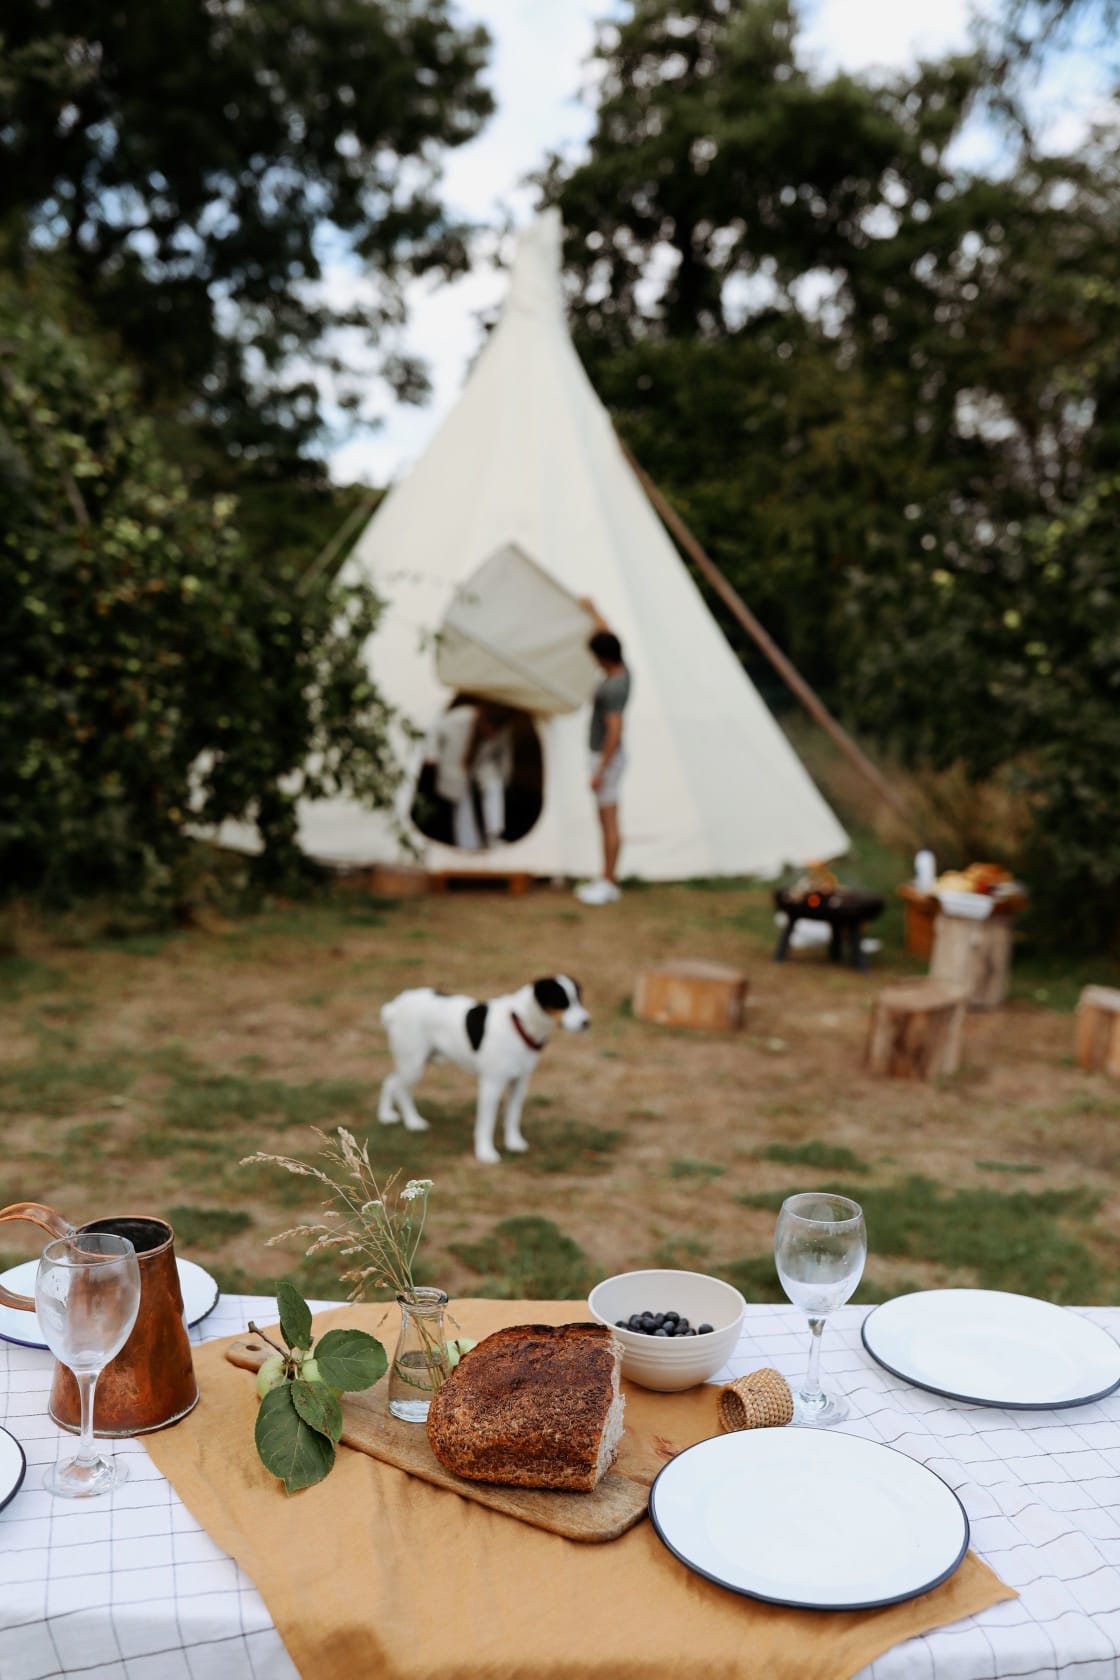 White House Glamping in Wye Valley